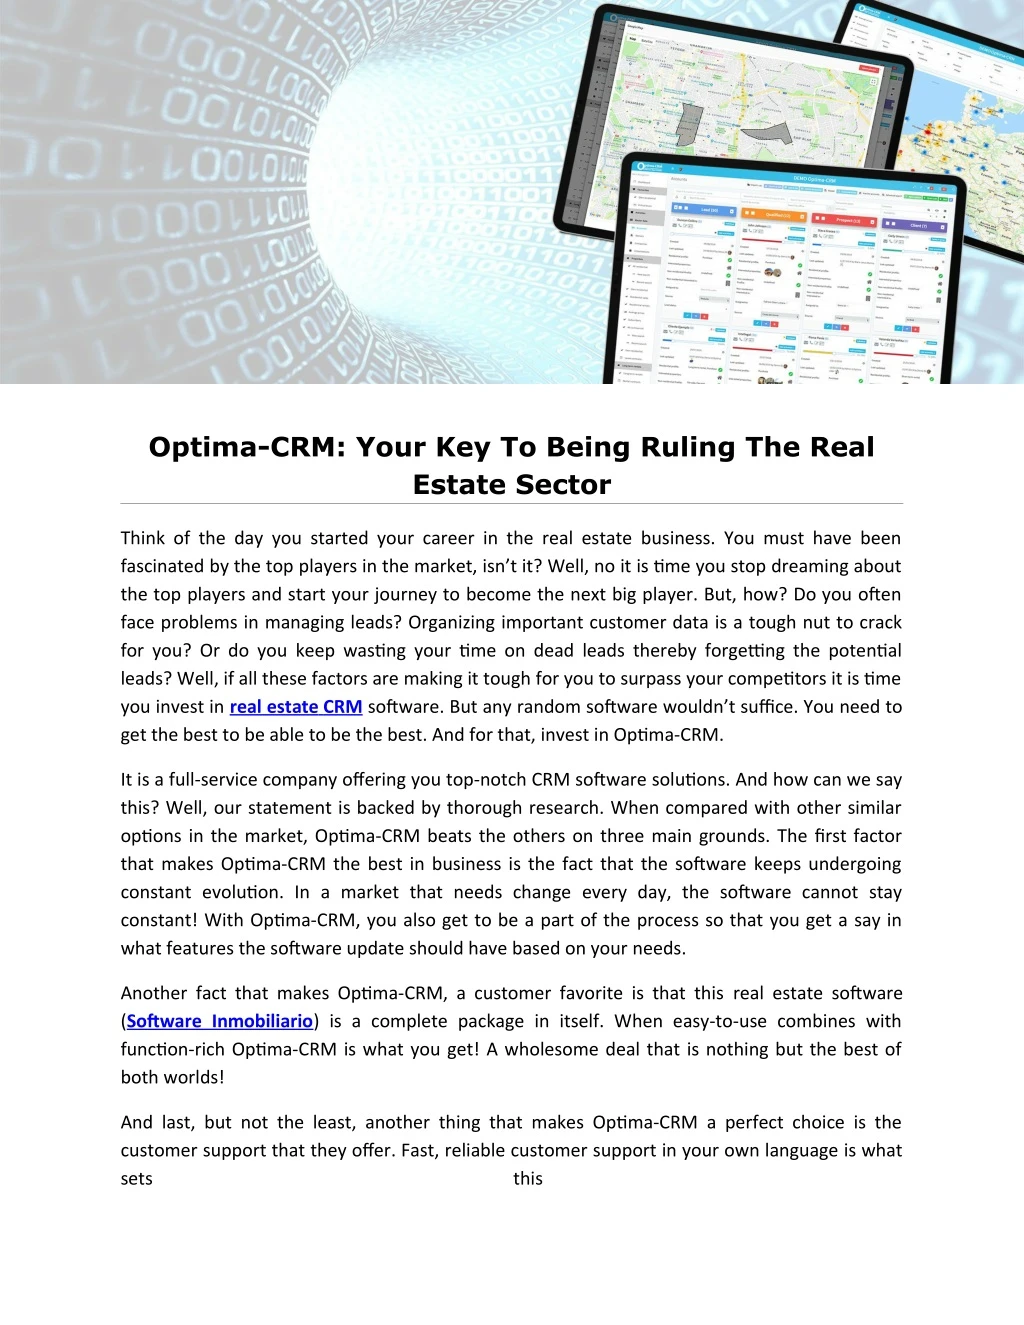 optima crm your key to being ruling the real